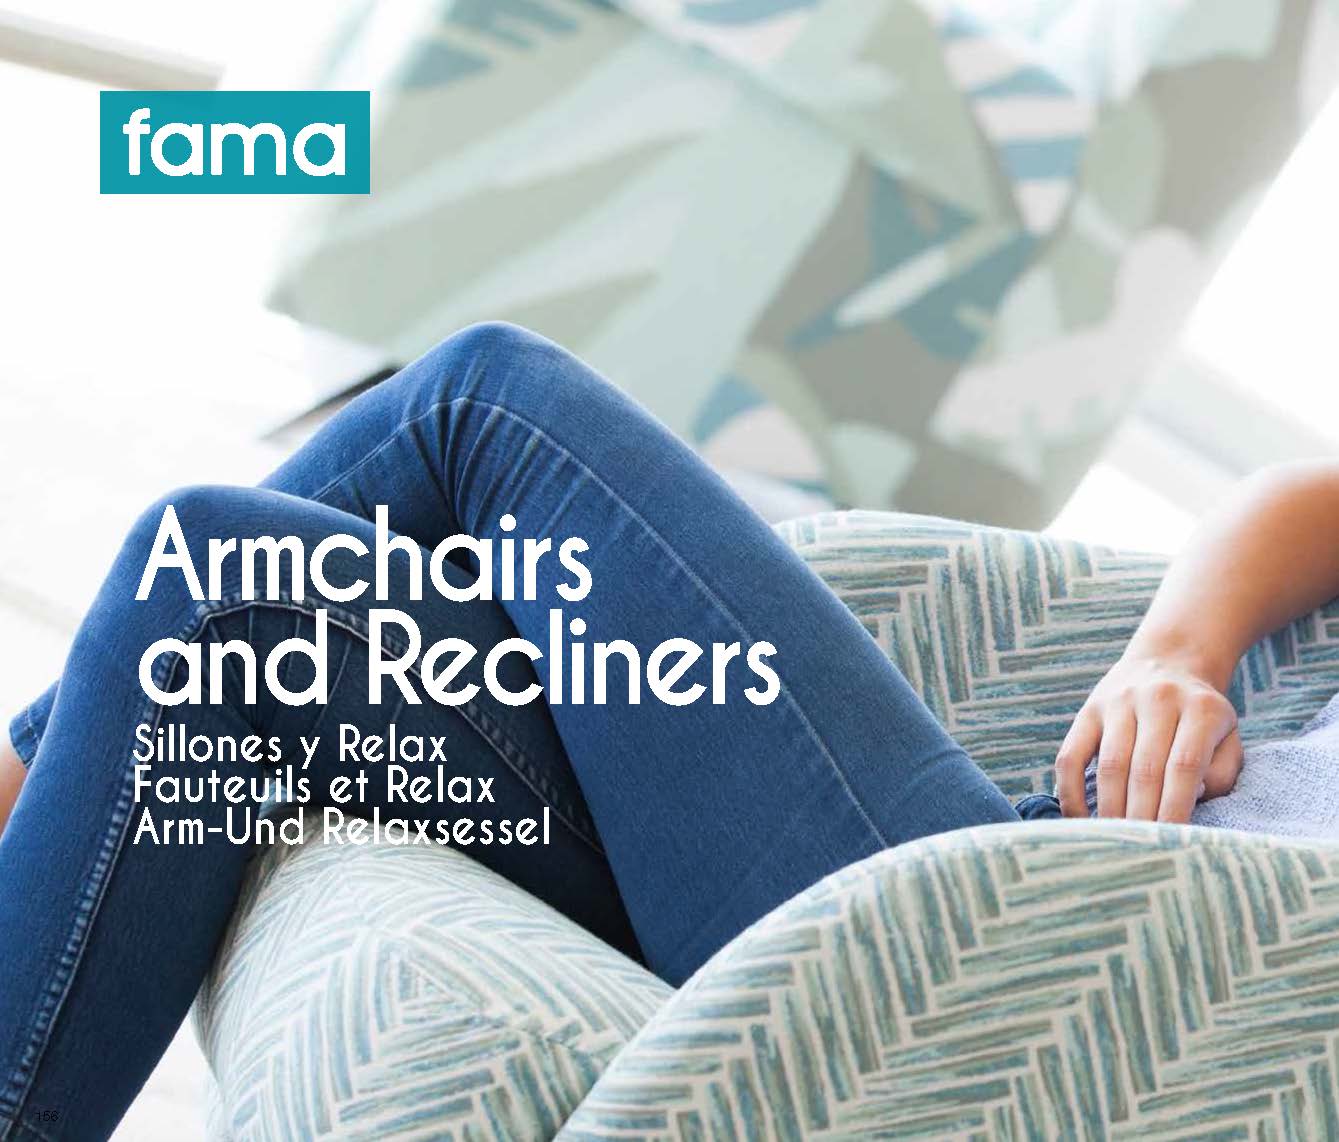 Brands ALF Capri Coffee Tables, Italy Fama Armchairs & Recliners